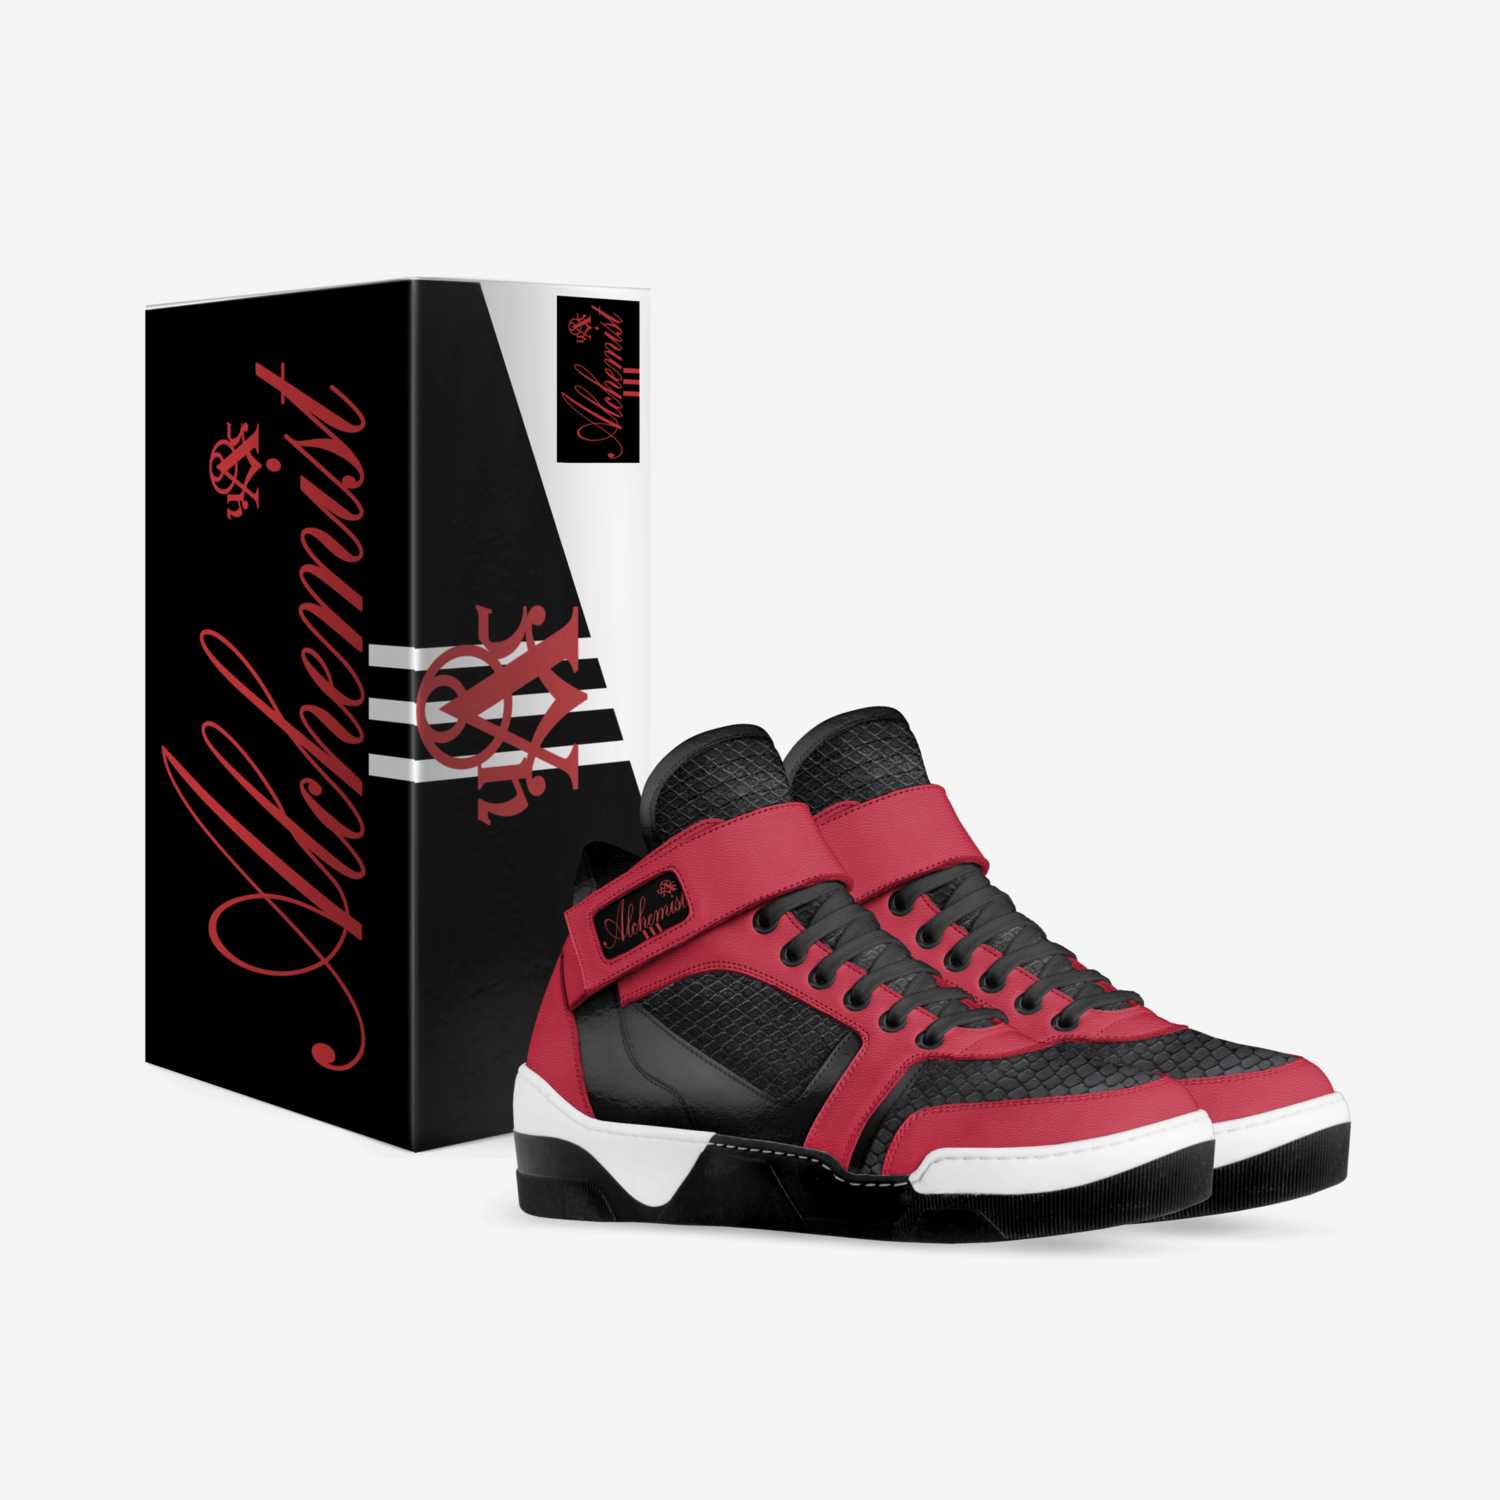 APIDTA custom made in Italy shoes by Urban Alchemist Clothing | Box view